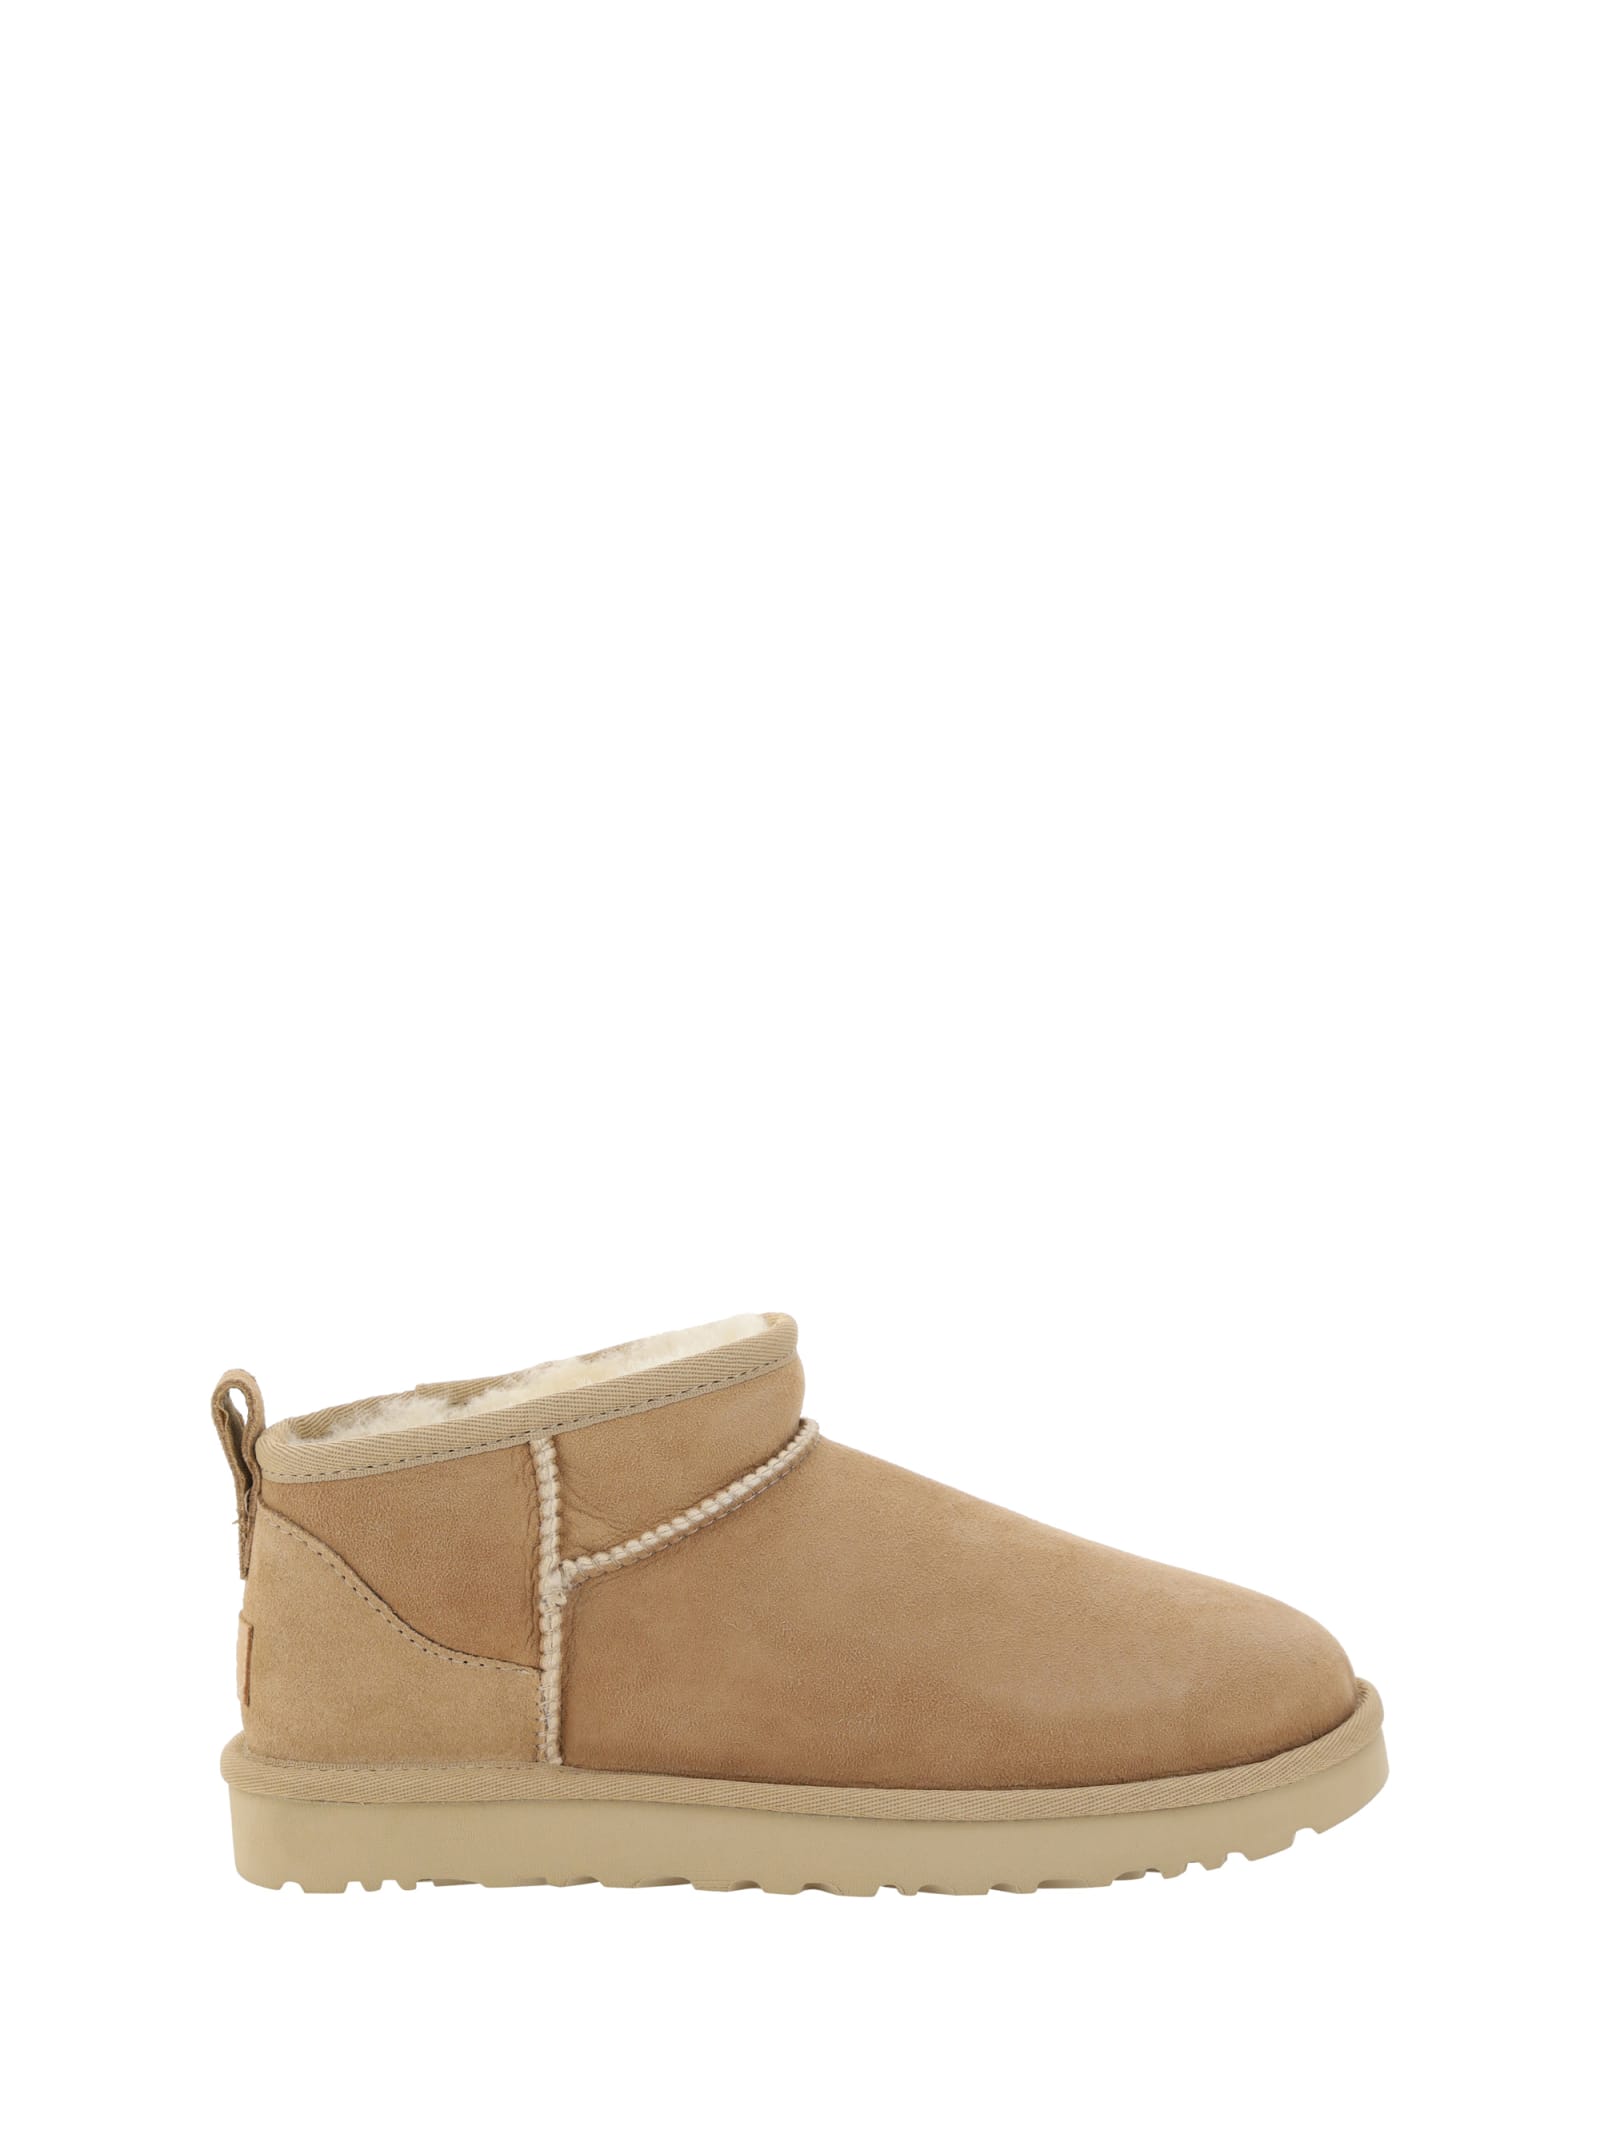 Shop Ugg Ultra Mini Boots In Sand